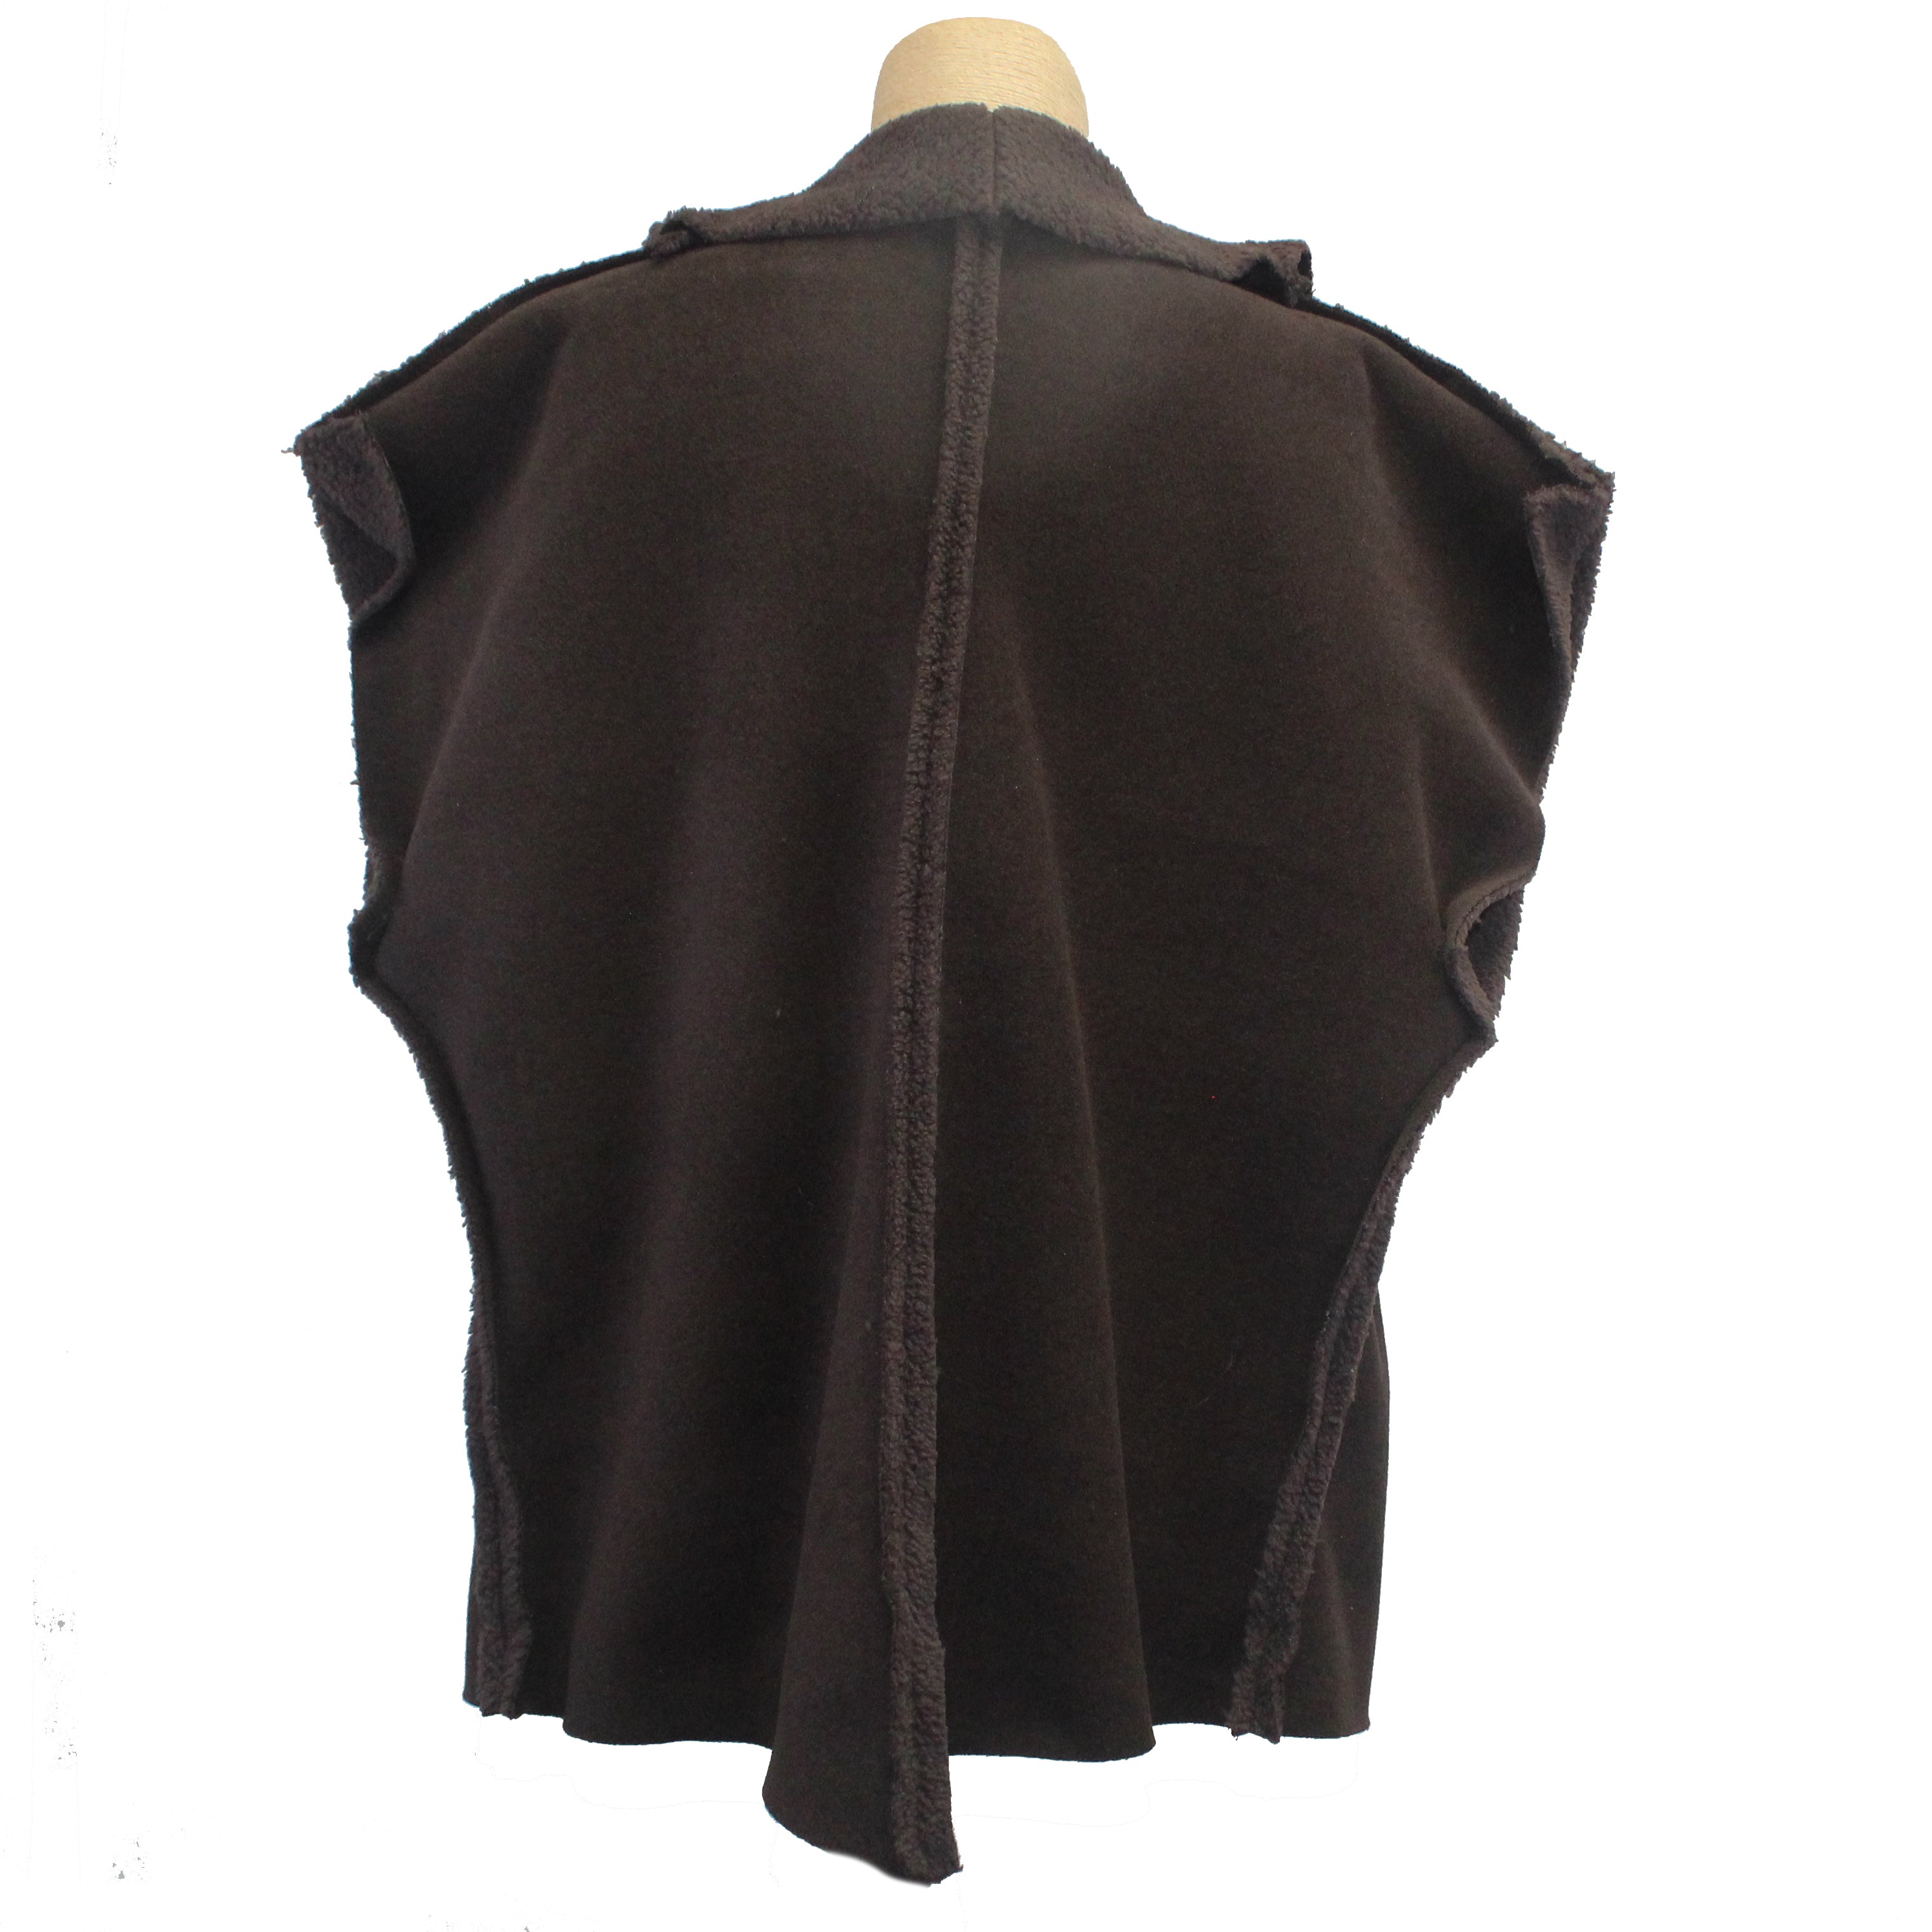 Mary Stackhouse Vest, High Neck, Soft Brown, L – Santa Fe Weaving Gallery